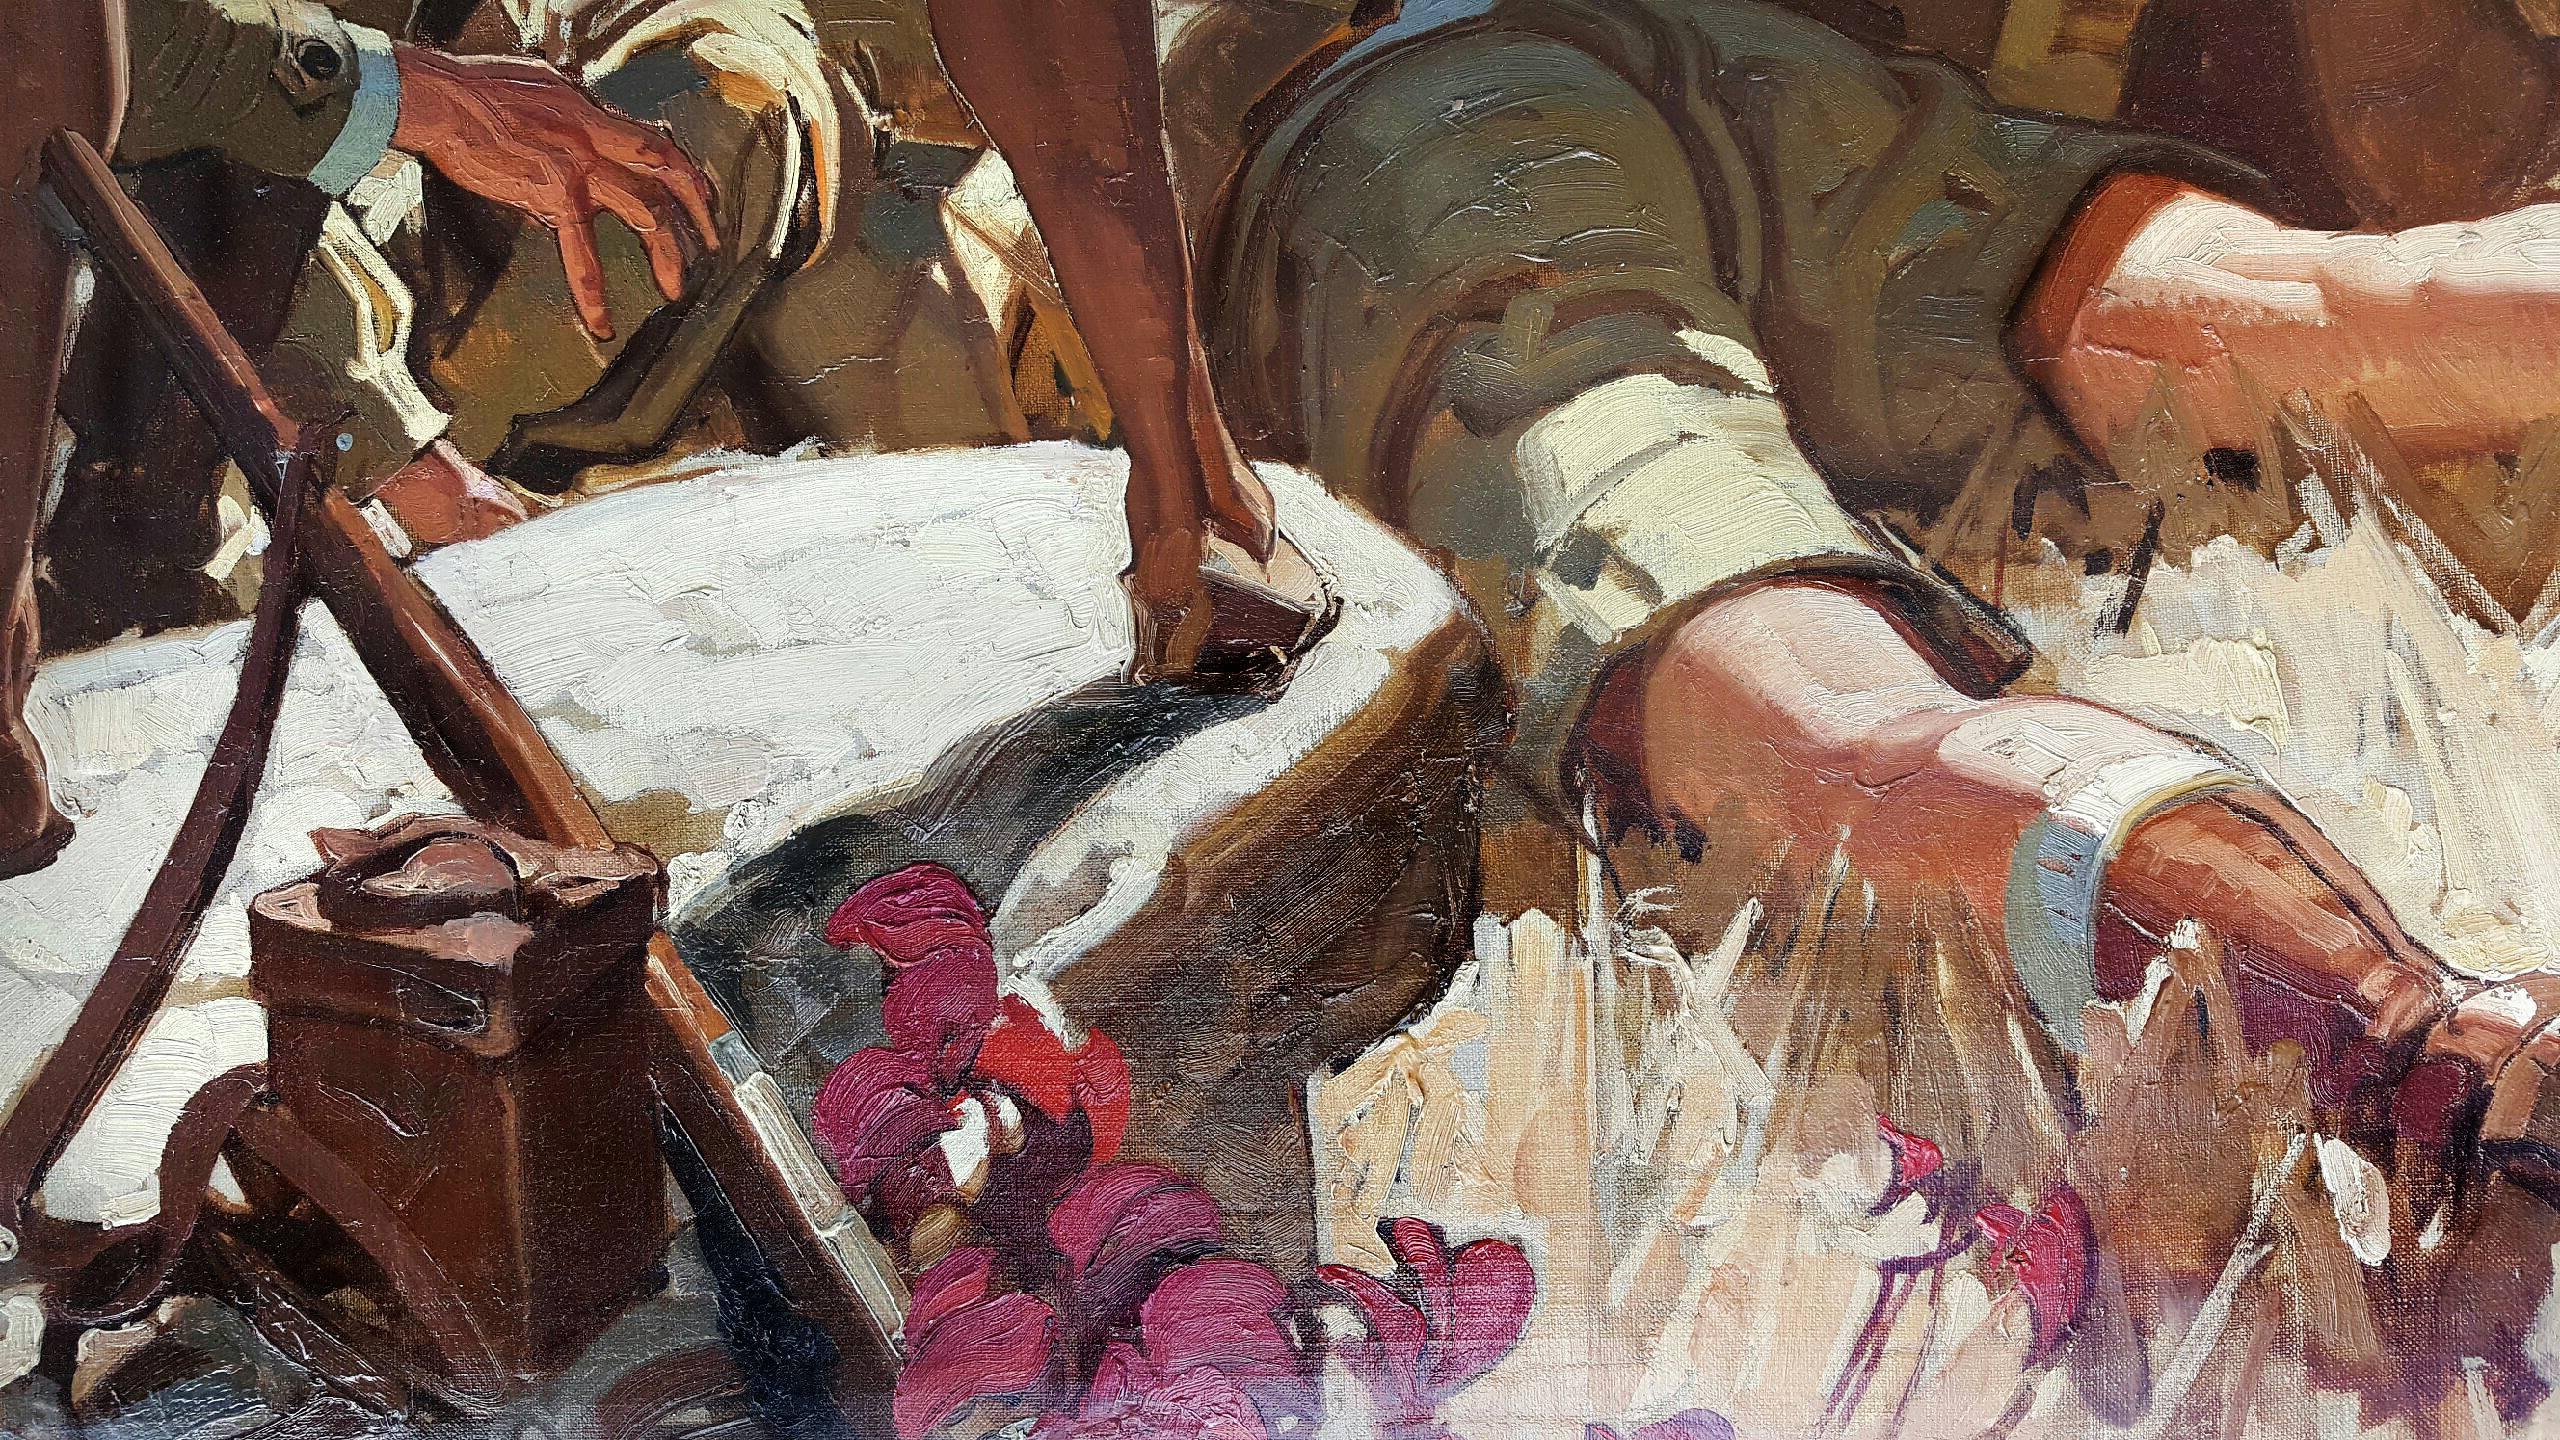 Ernest Hemingway. The Short Happy Life of Francis Macomber,  He Lay Face Down,  - Painting by Dean Cornwell